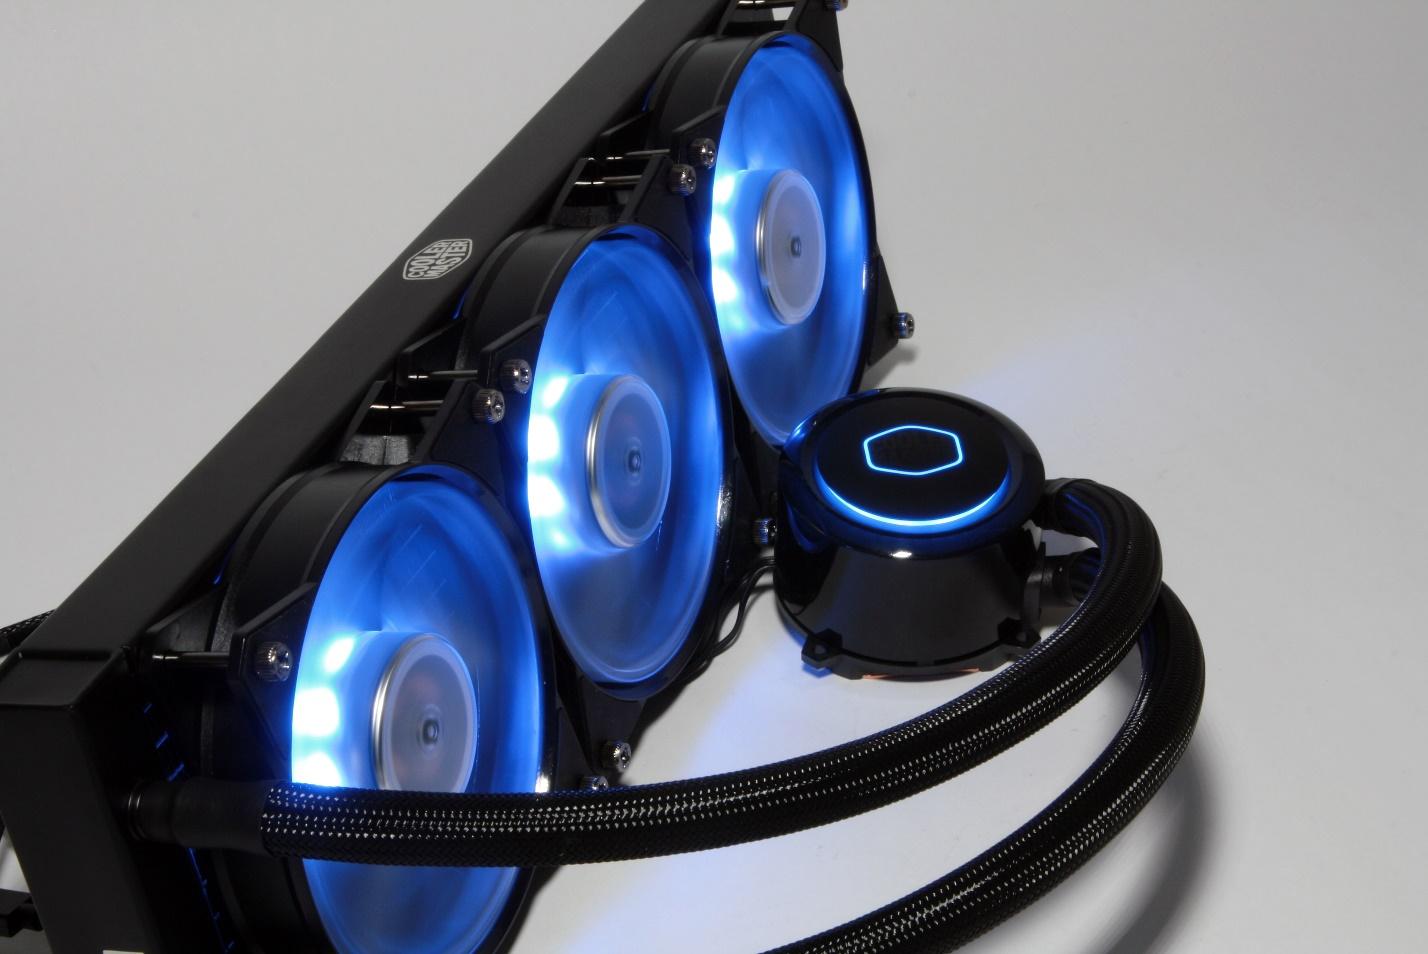 Testing Results Conclusion Cooler Master Masterliquid Ml360r Rgb Review The New Cooling Champ